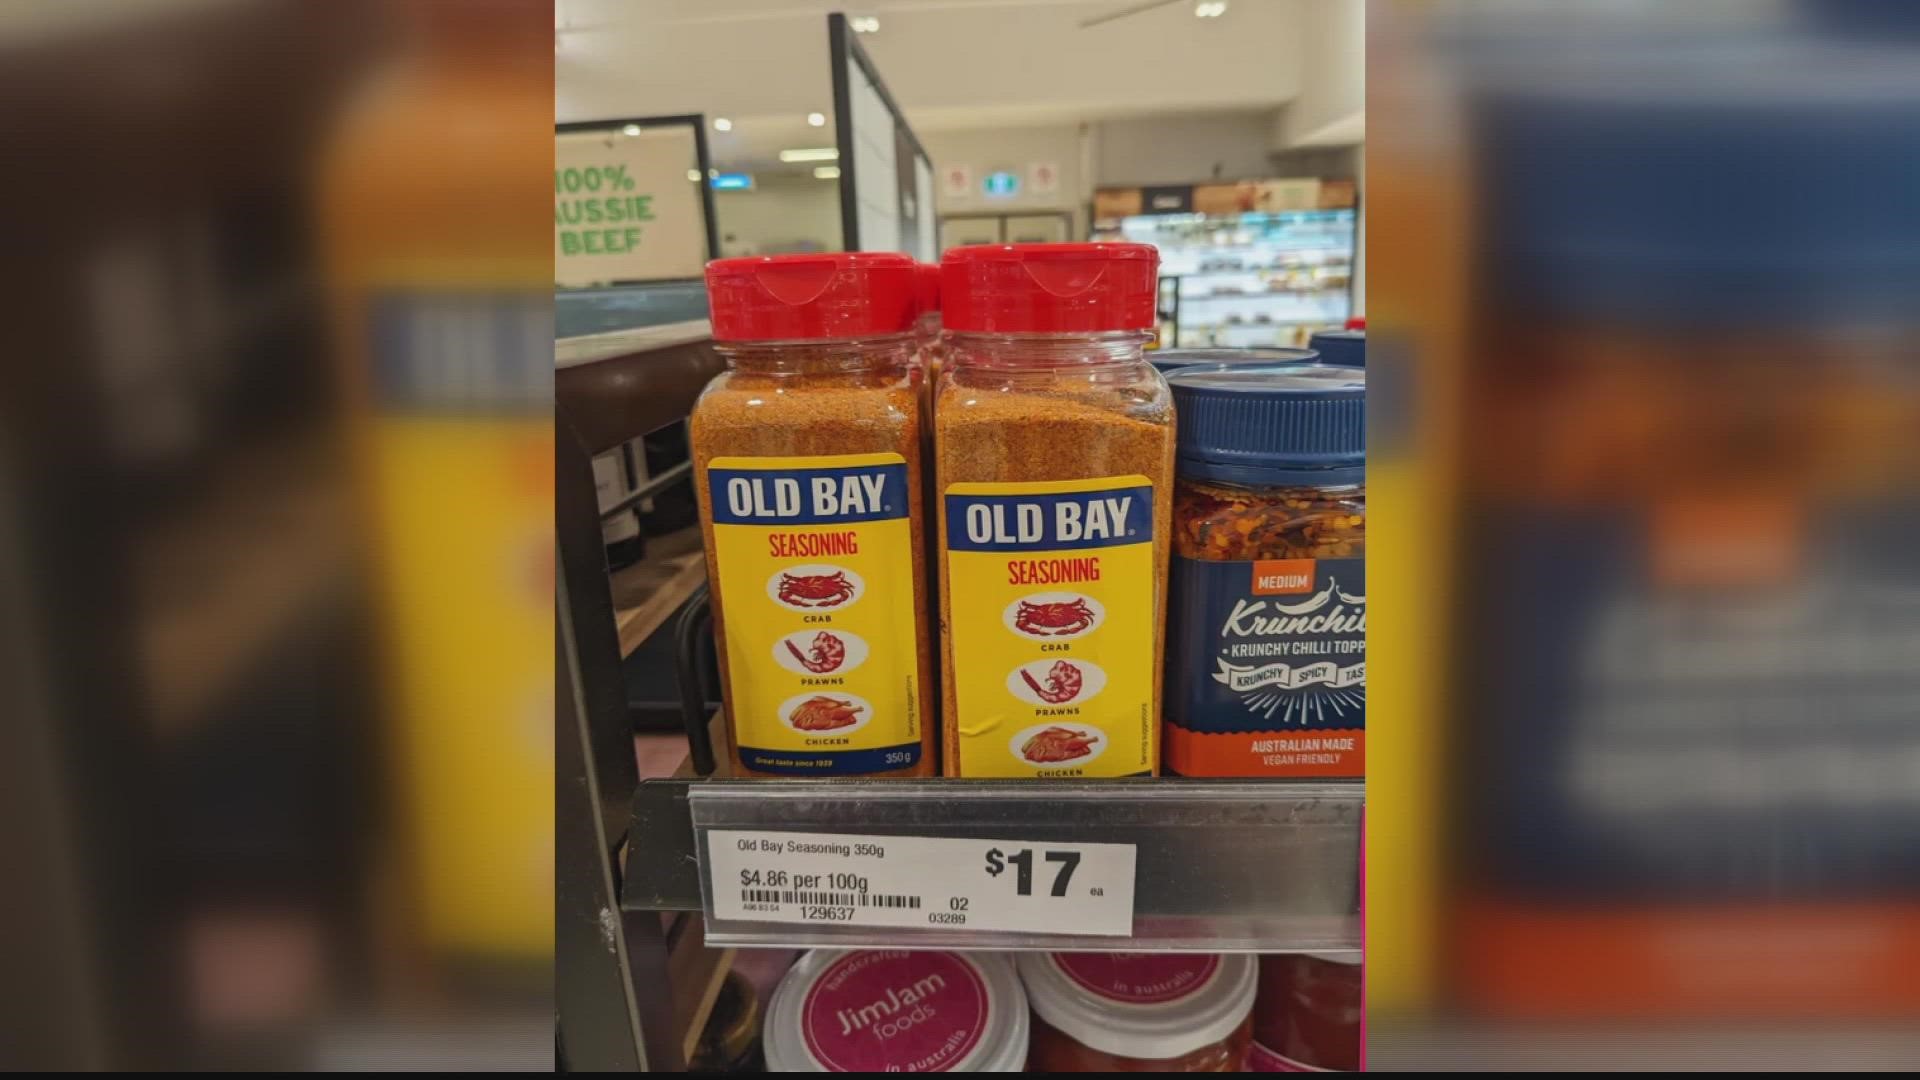 I love Old Bay more than anyone but one person may have found some that I wouldn't touch.